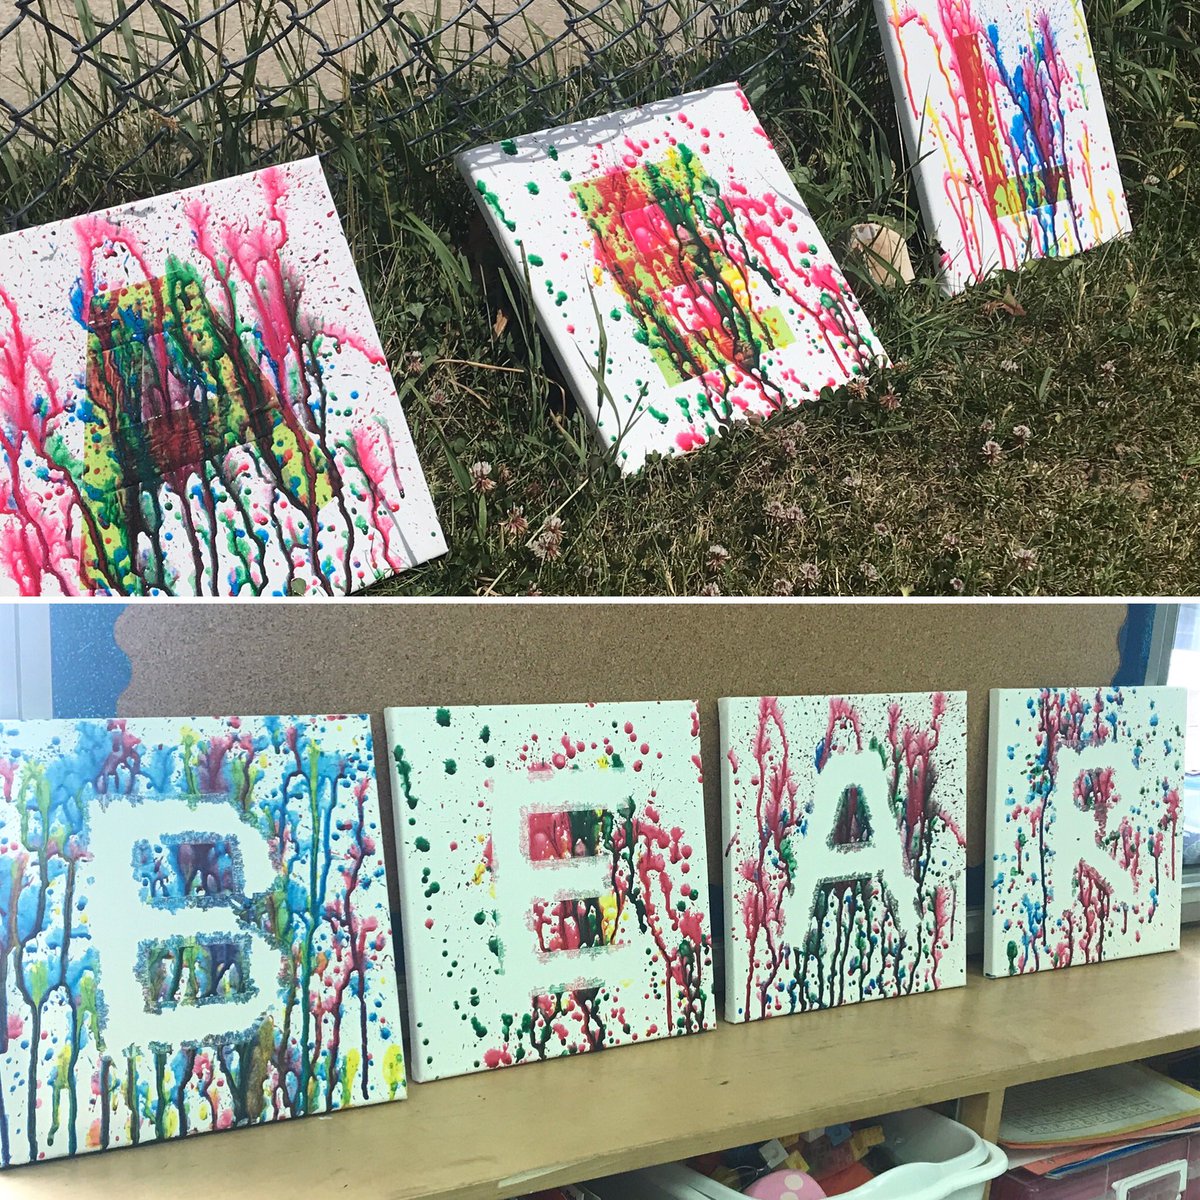 Water Day Fun yesterday! We were thankful for the warmth and the sunshine. We played games with wet sponges and water balloon and created some water squirted art! #lifeskills #inpersonlearning #waterday #waterfun #staycool @mvpsvipers @ugdsb